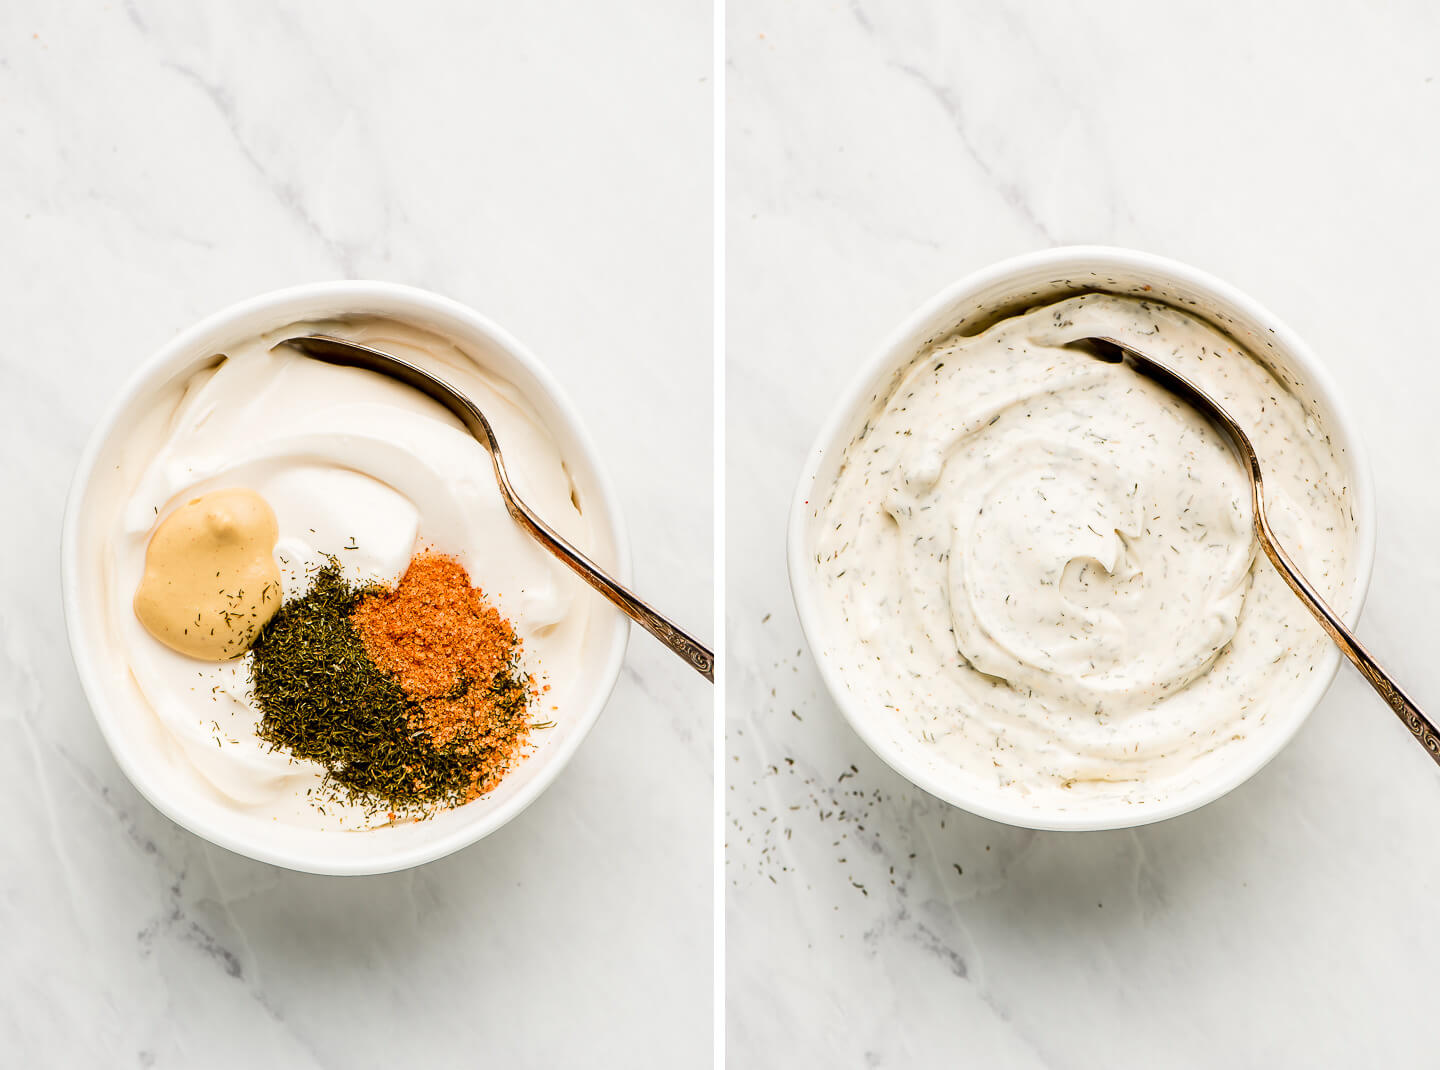 Diptych- Small bowl of a thick white creamy sauce with seasonings on top; all mixed together.